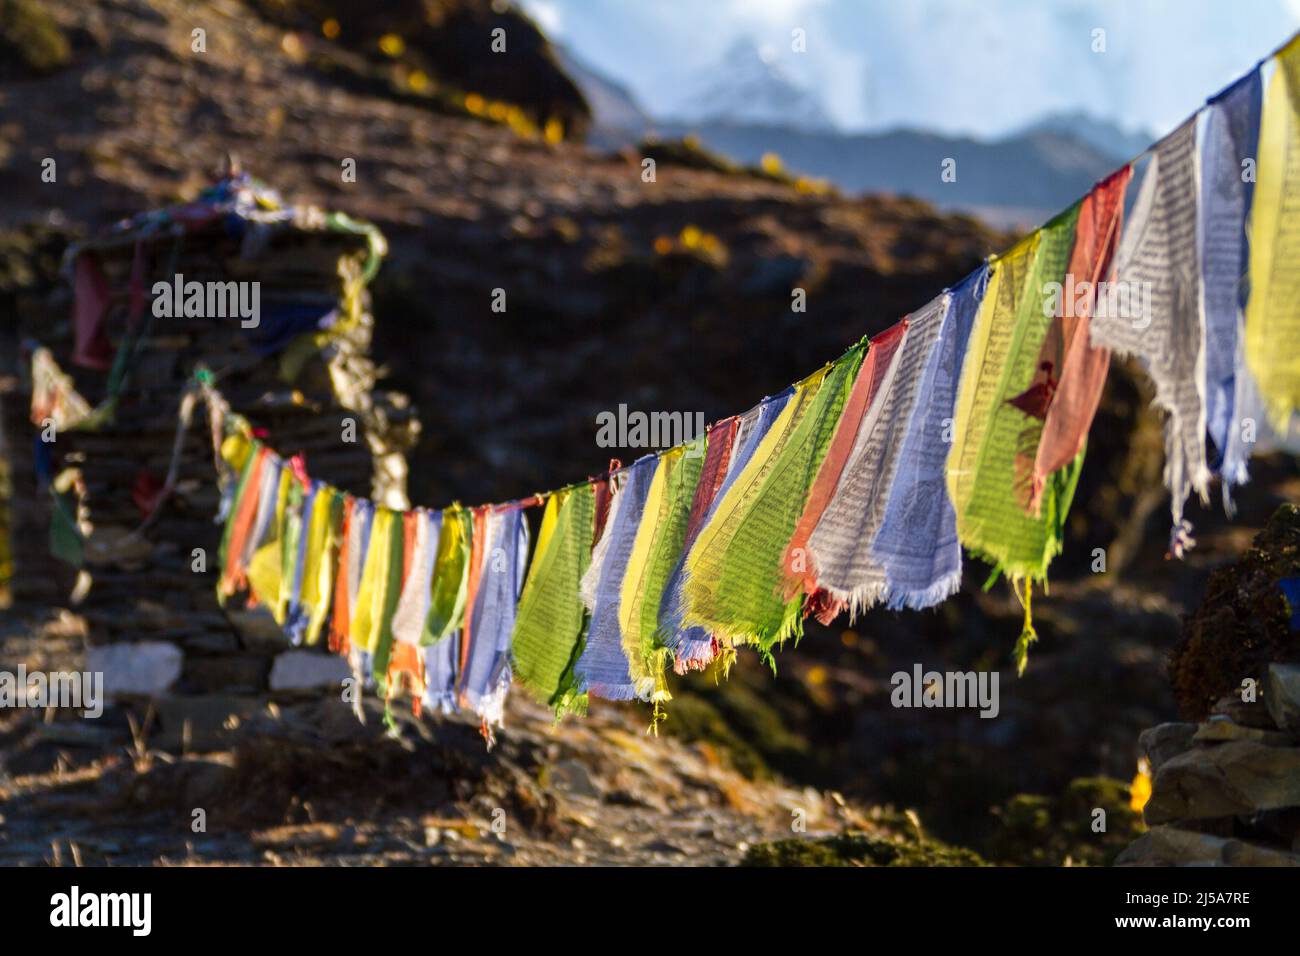 Buddhist prayer flags fly in front of distant snowcapped mountains in the Solukhumbu Region of the Nepali Himalayas - Dingboche - Nepal Stock Photo